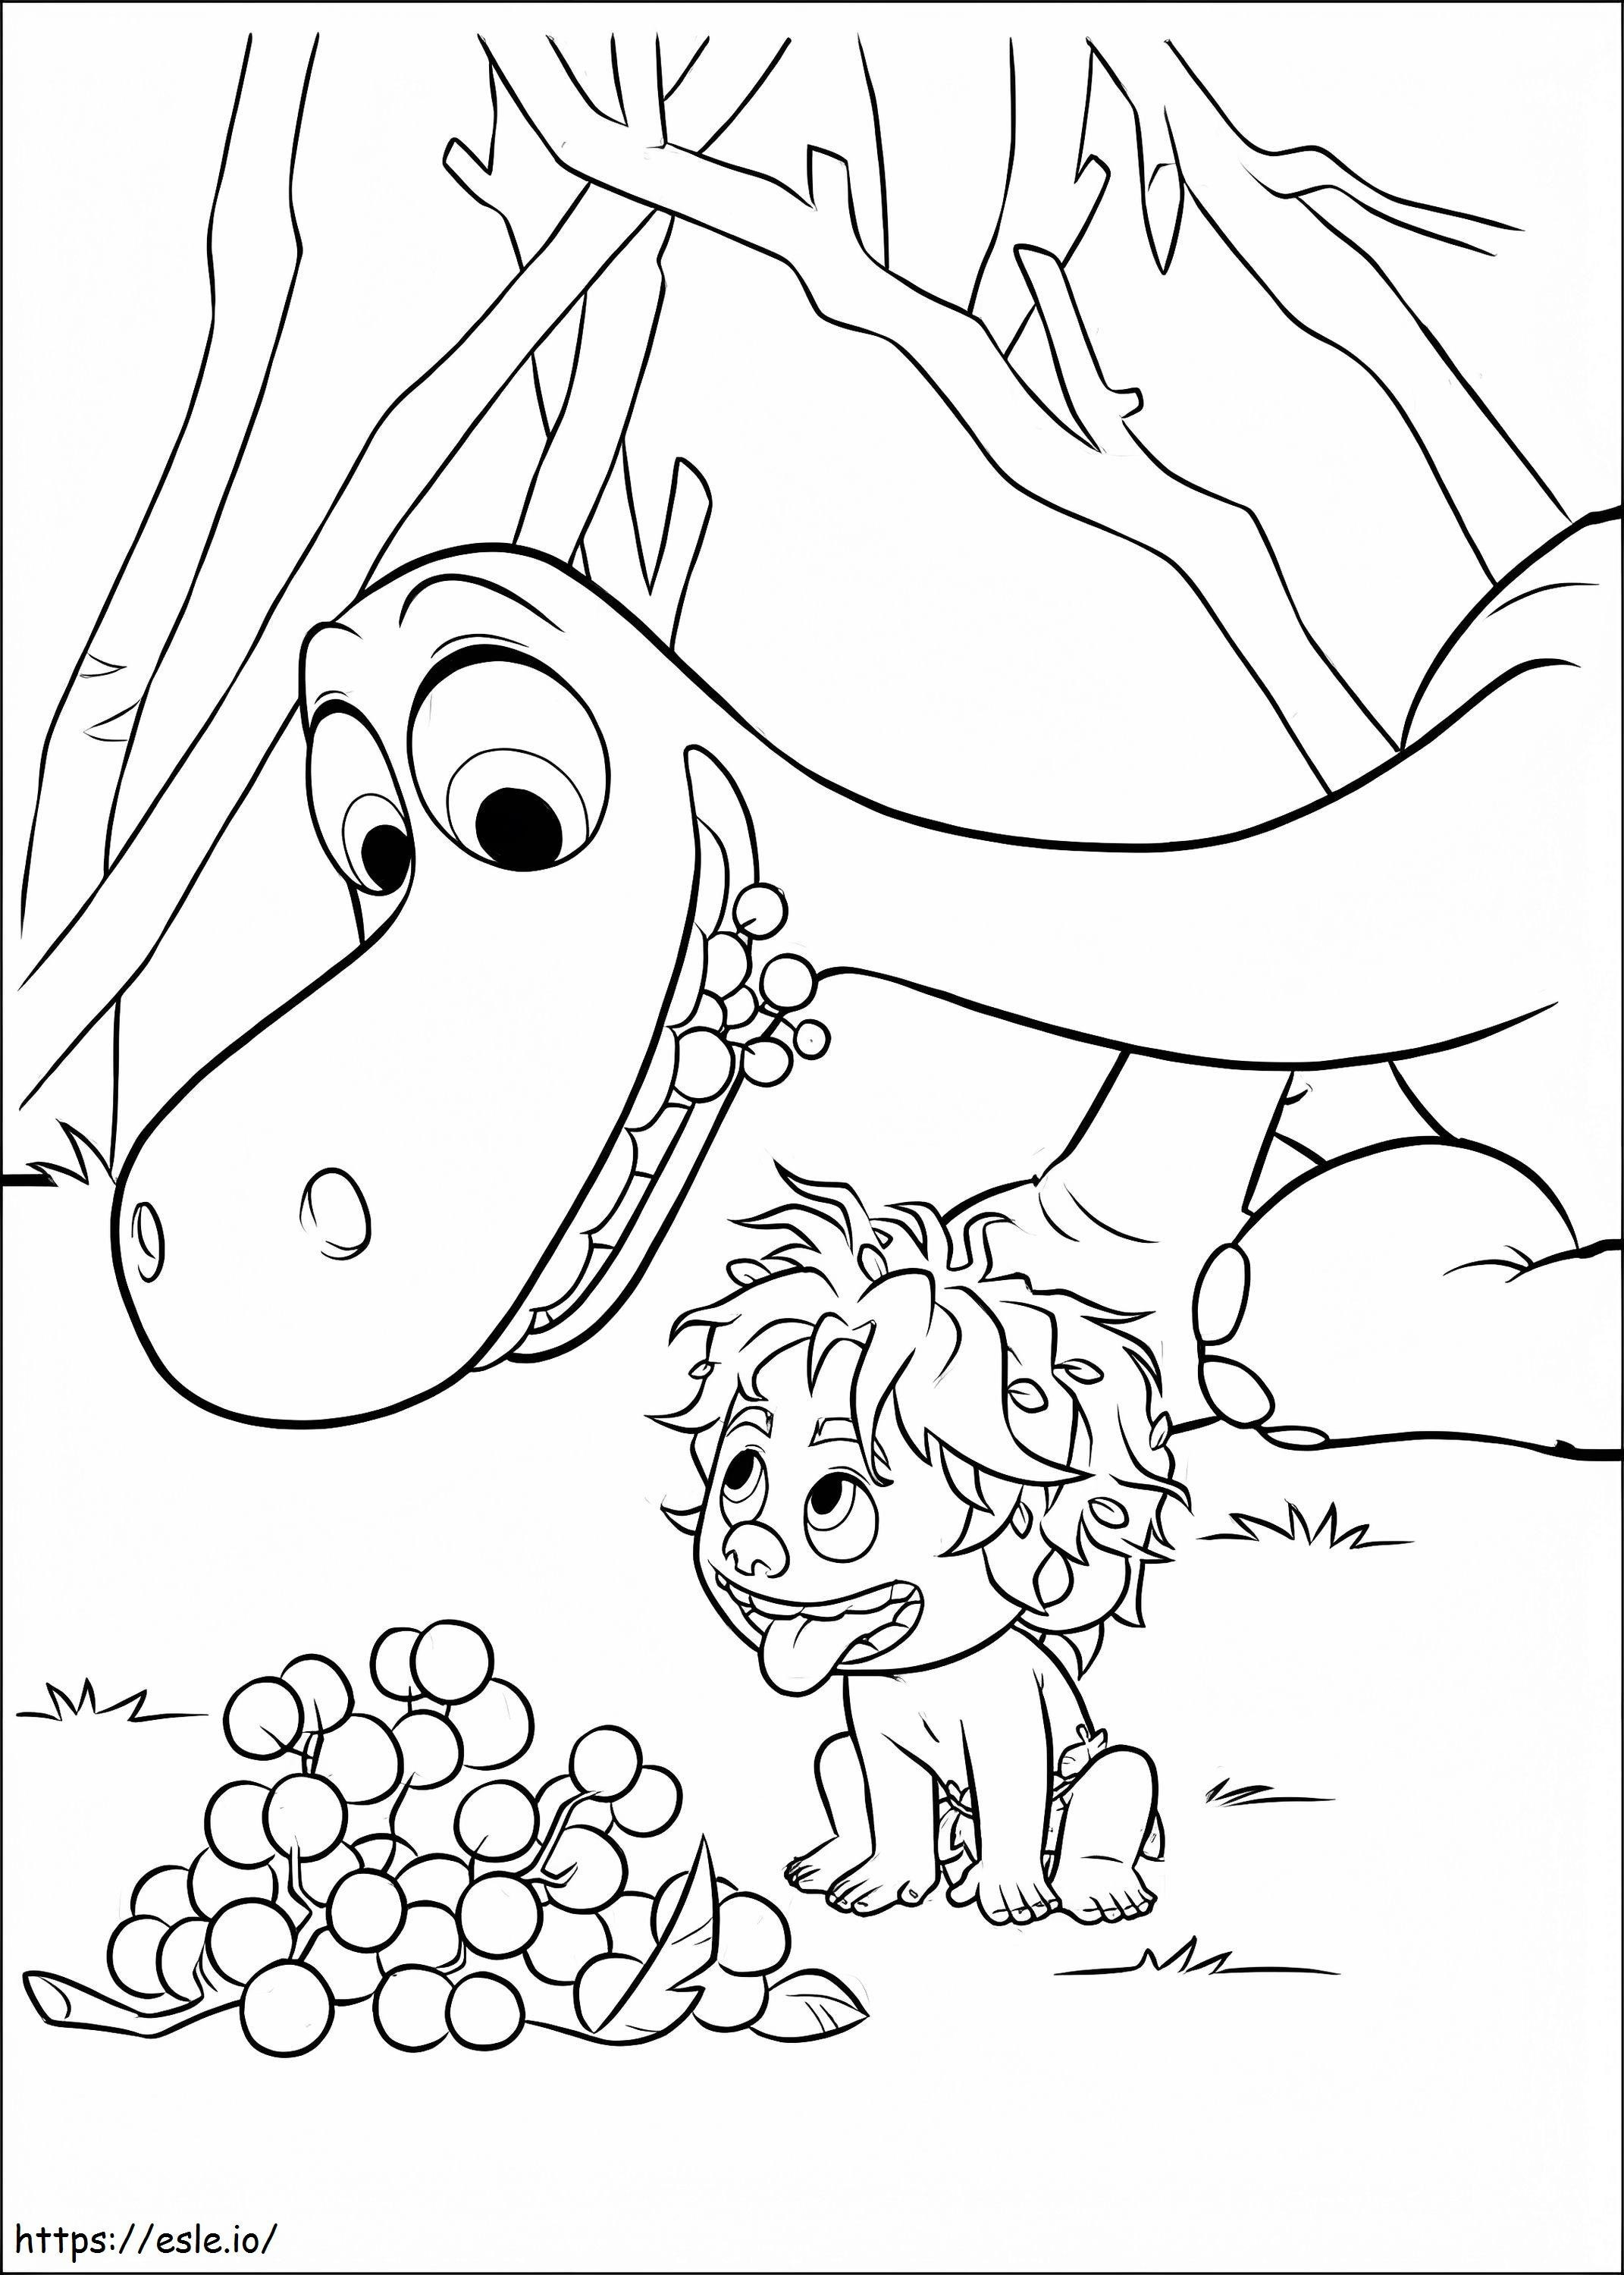 Spot And Arlo Eating Fruit coloring page